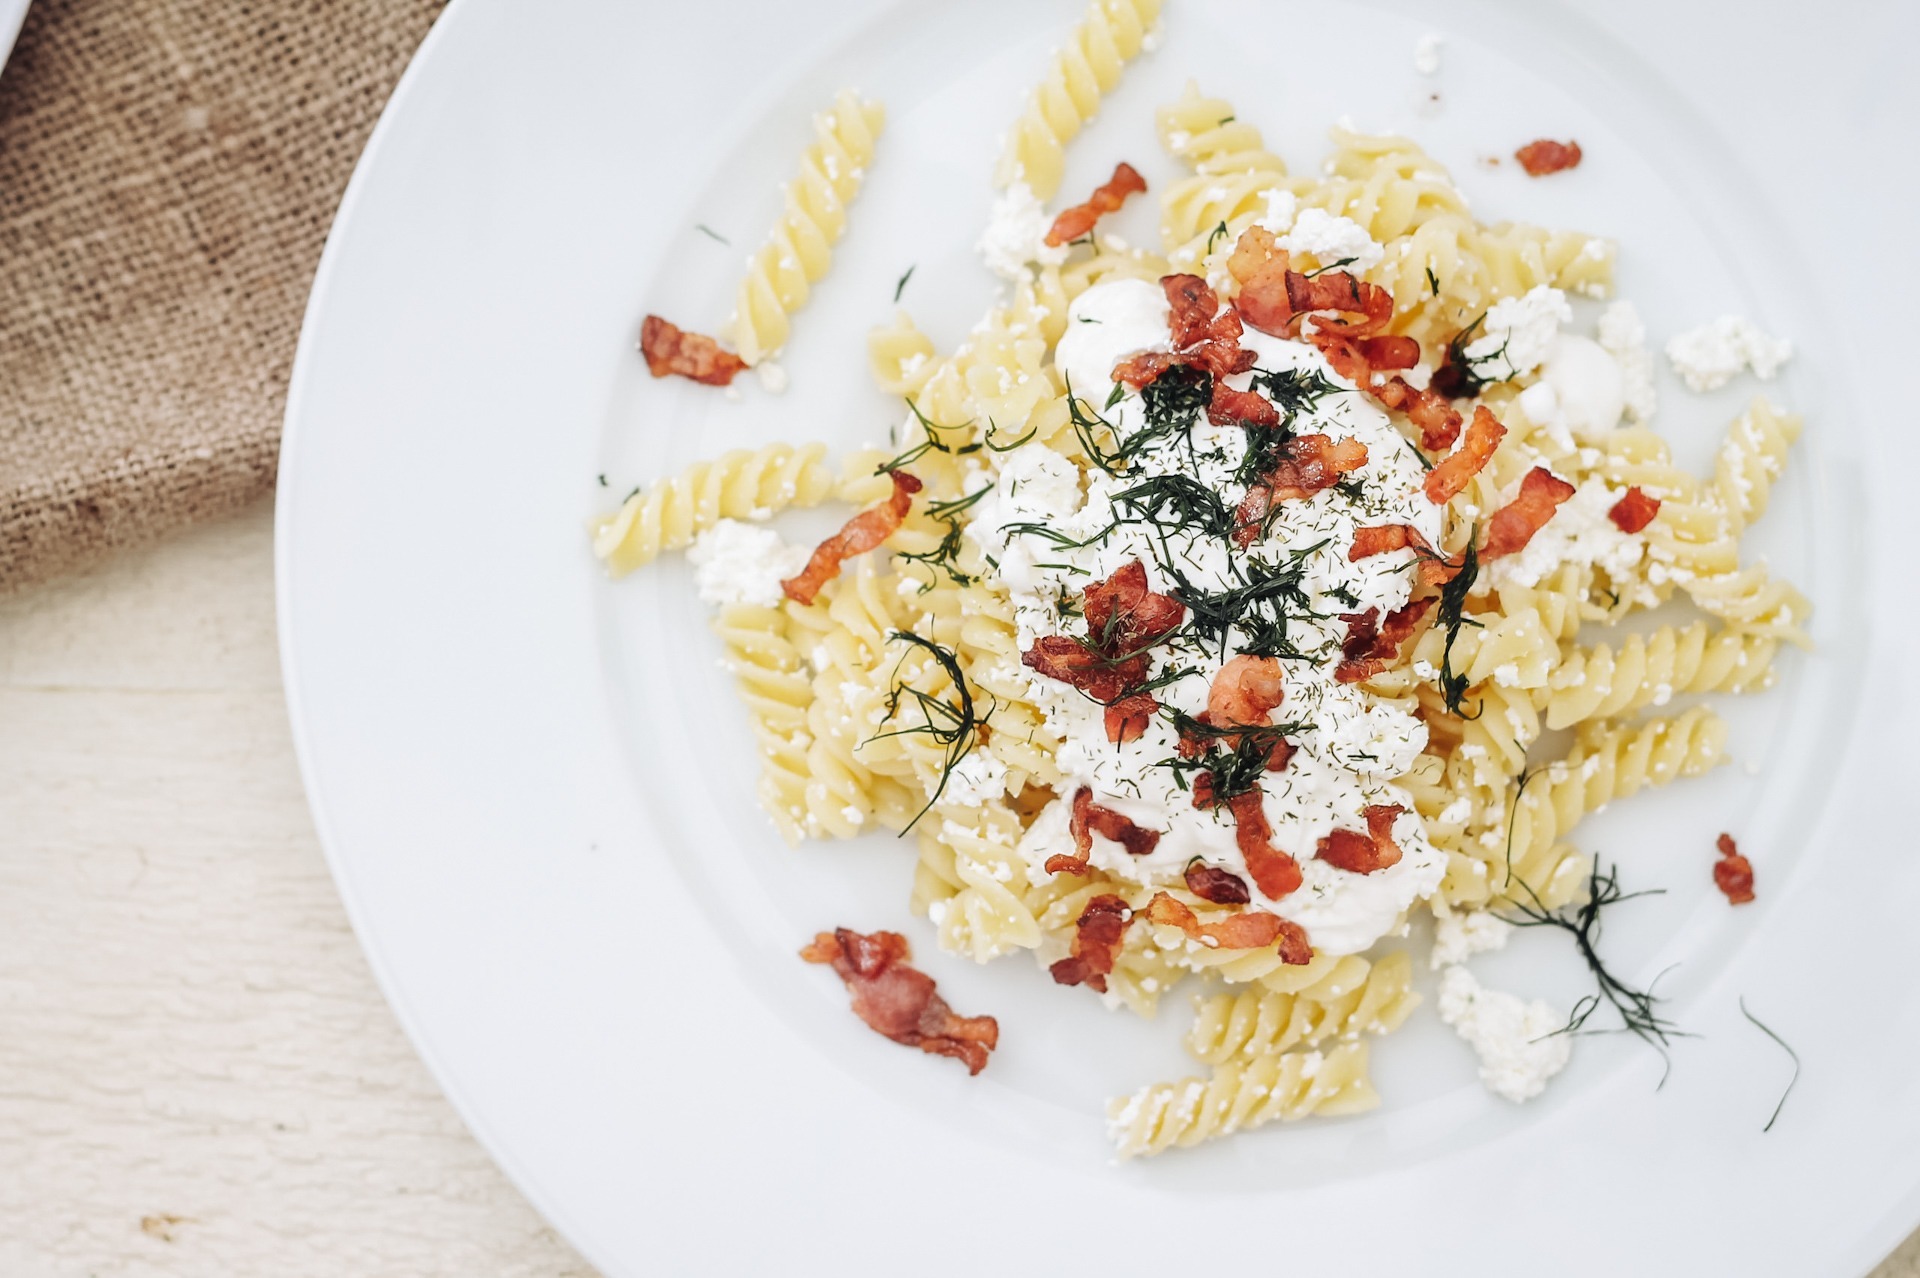 Dill-cottage cheese noodles with fried bacon